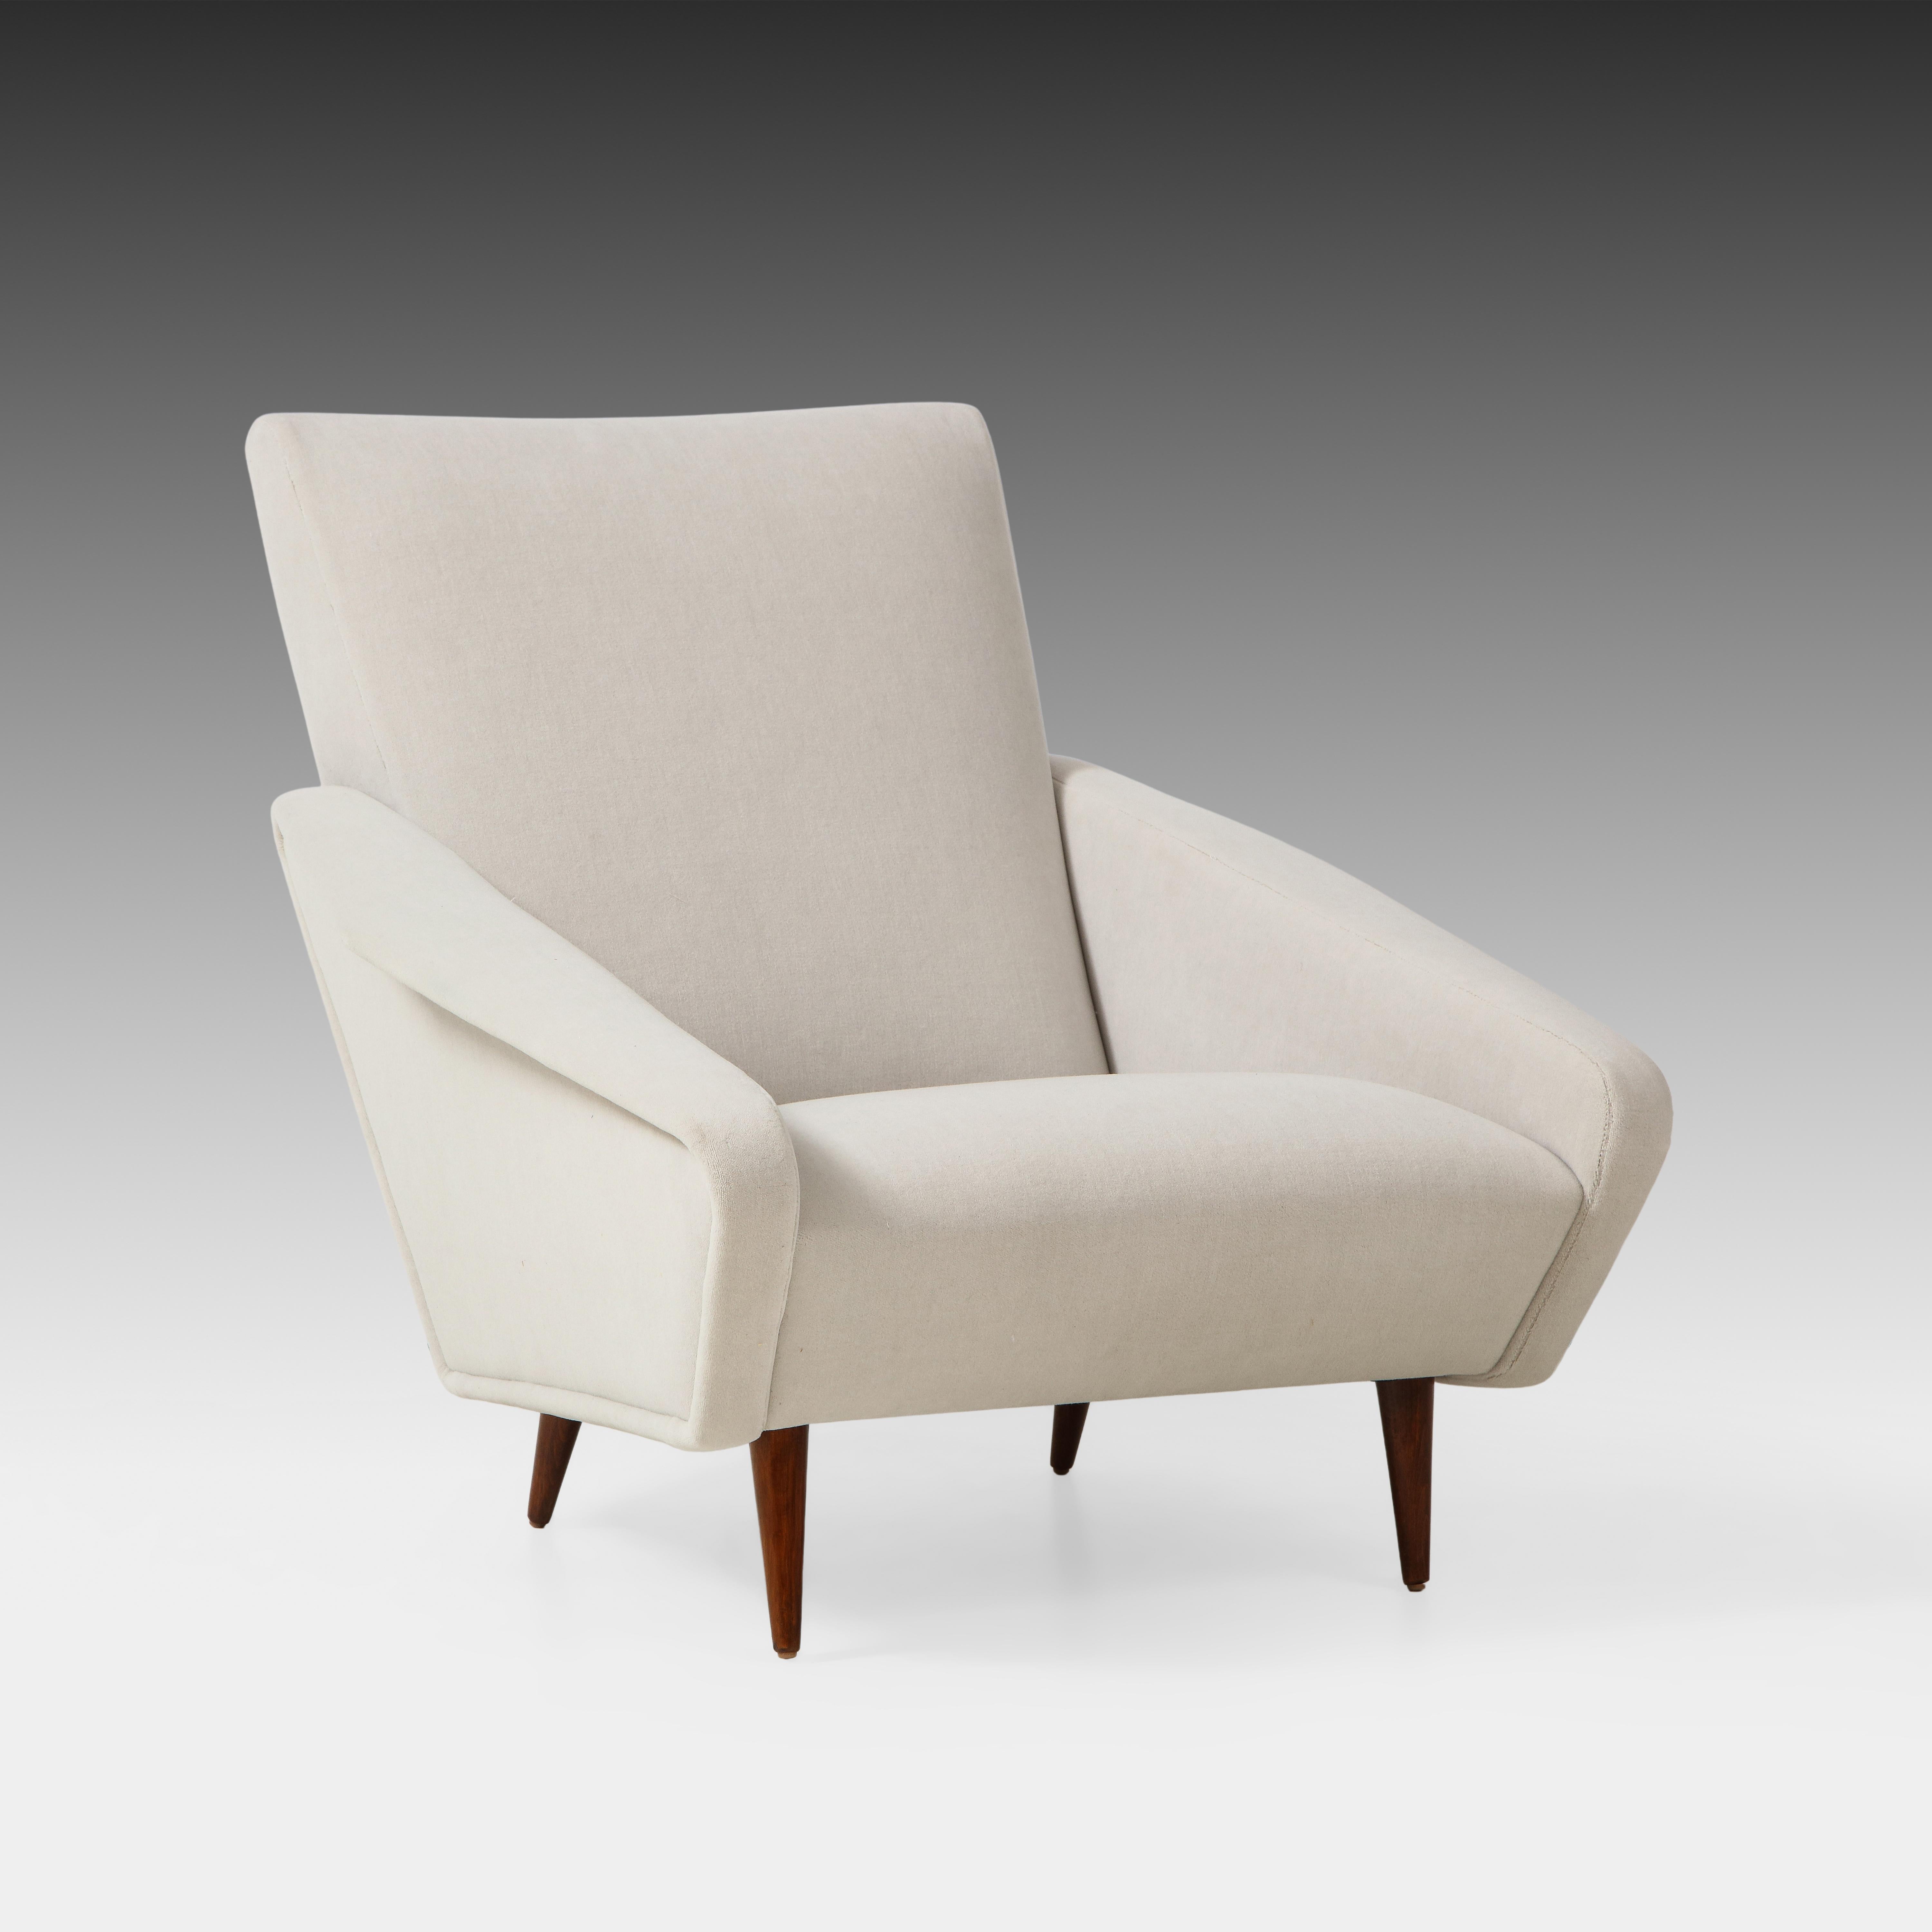 Mid-20th Century Gio Ponti for Cassina Rare Pair of Distex Lounge Chairs Model 807 in Wool Velvet